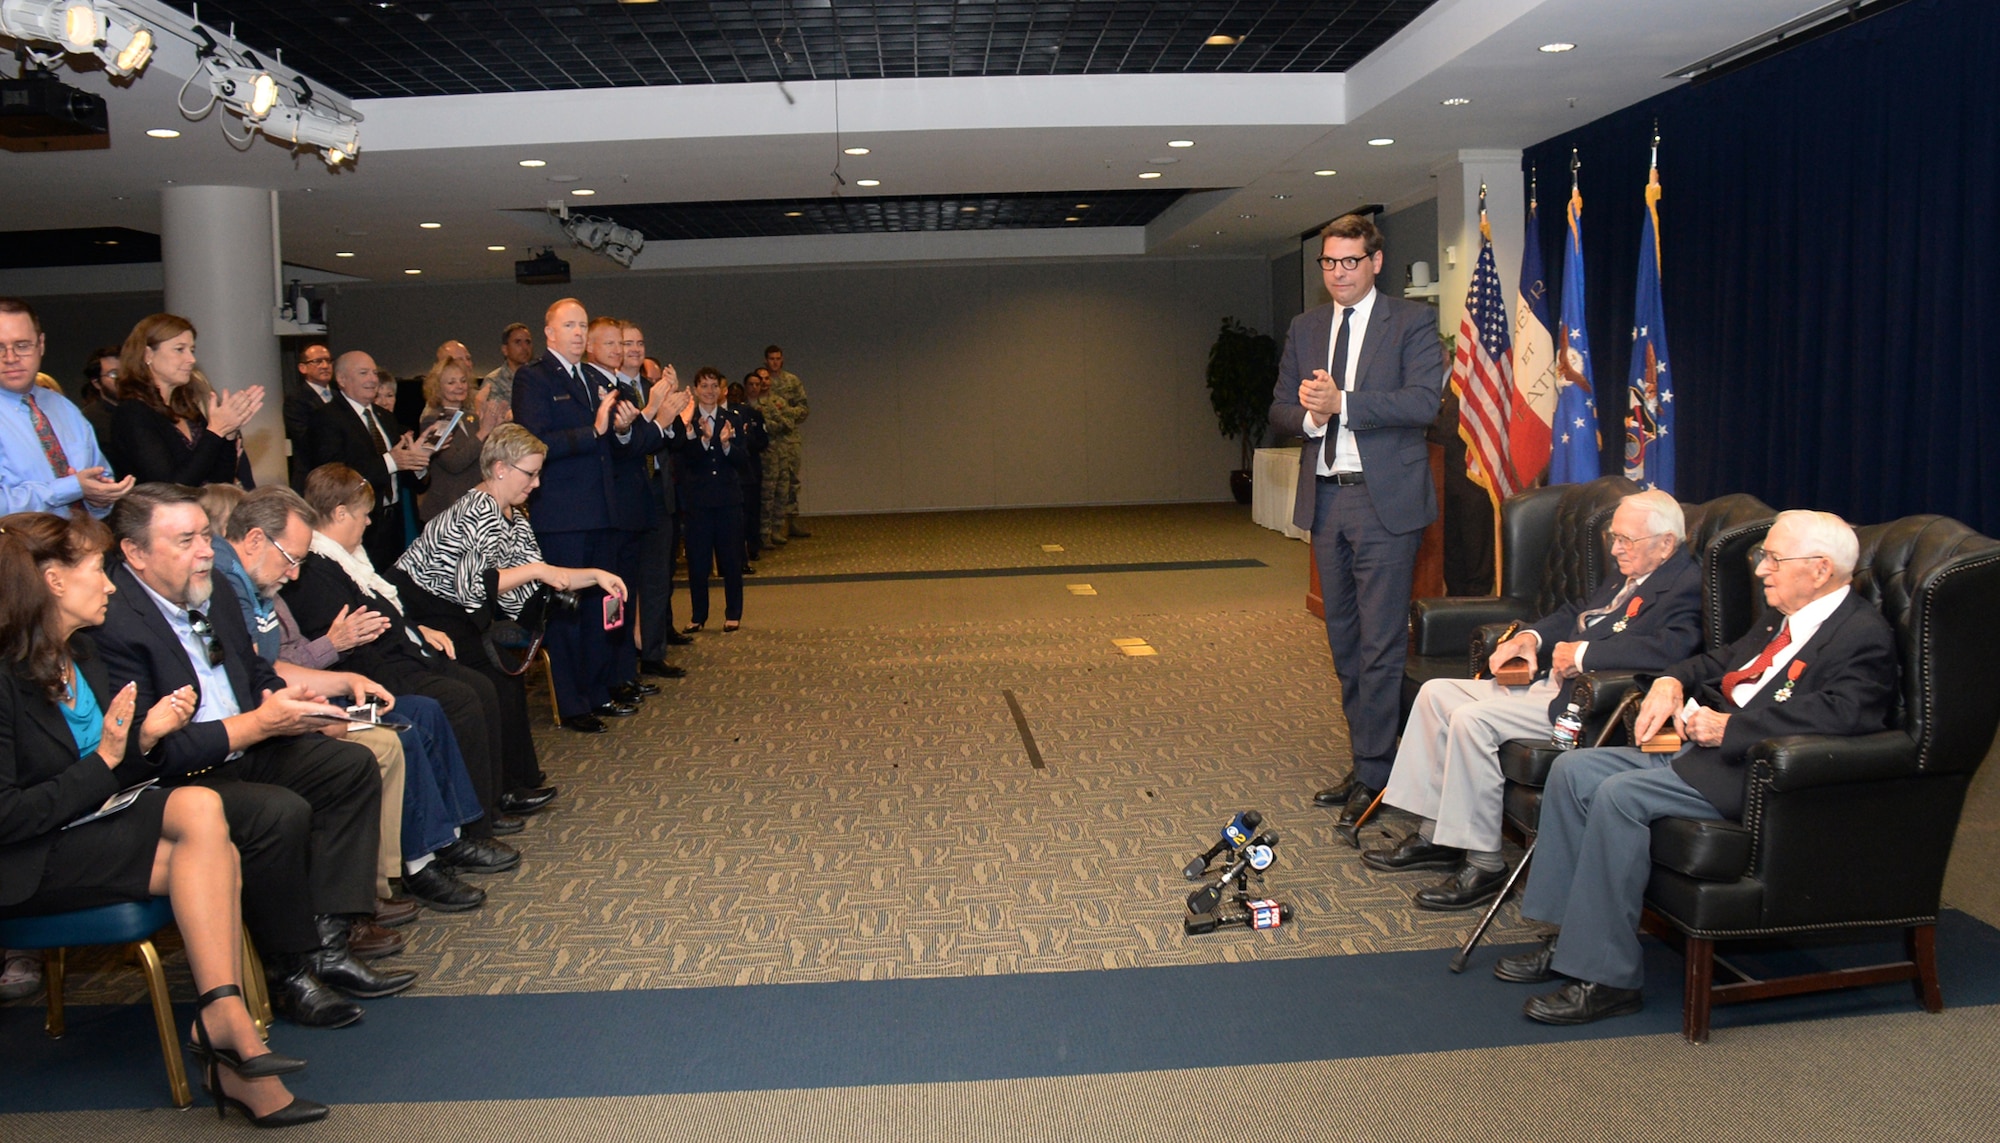 Christophe Lemoine, French consul general in Los Angeles, joins an audience of family and friends at the Gordon Conference Center in the Schriever Space Complex of the Space and Missile Systems Center in congratulating identical twin brothers and retired Air Force Reserve Majs. Russell “Lynn” Clanin and Raymond “Glenn” Clanin as the newest recipients of the French government's highest distinction for their military service as World War II veterans, the Legion of Honor medal. (U.S. Air Force photo/Van De Ha)